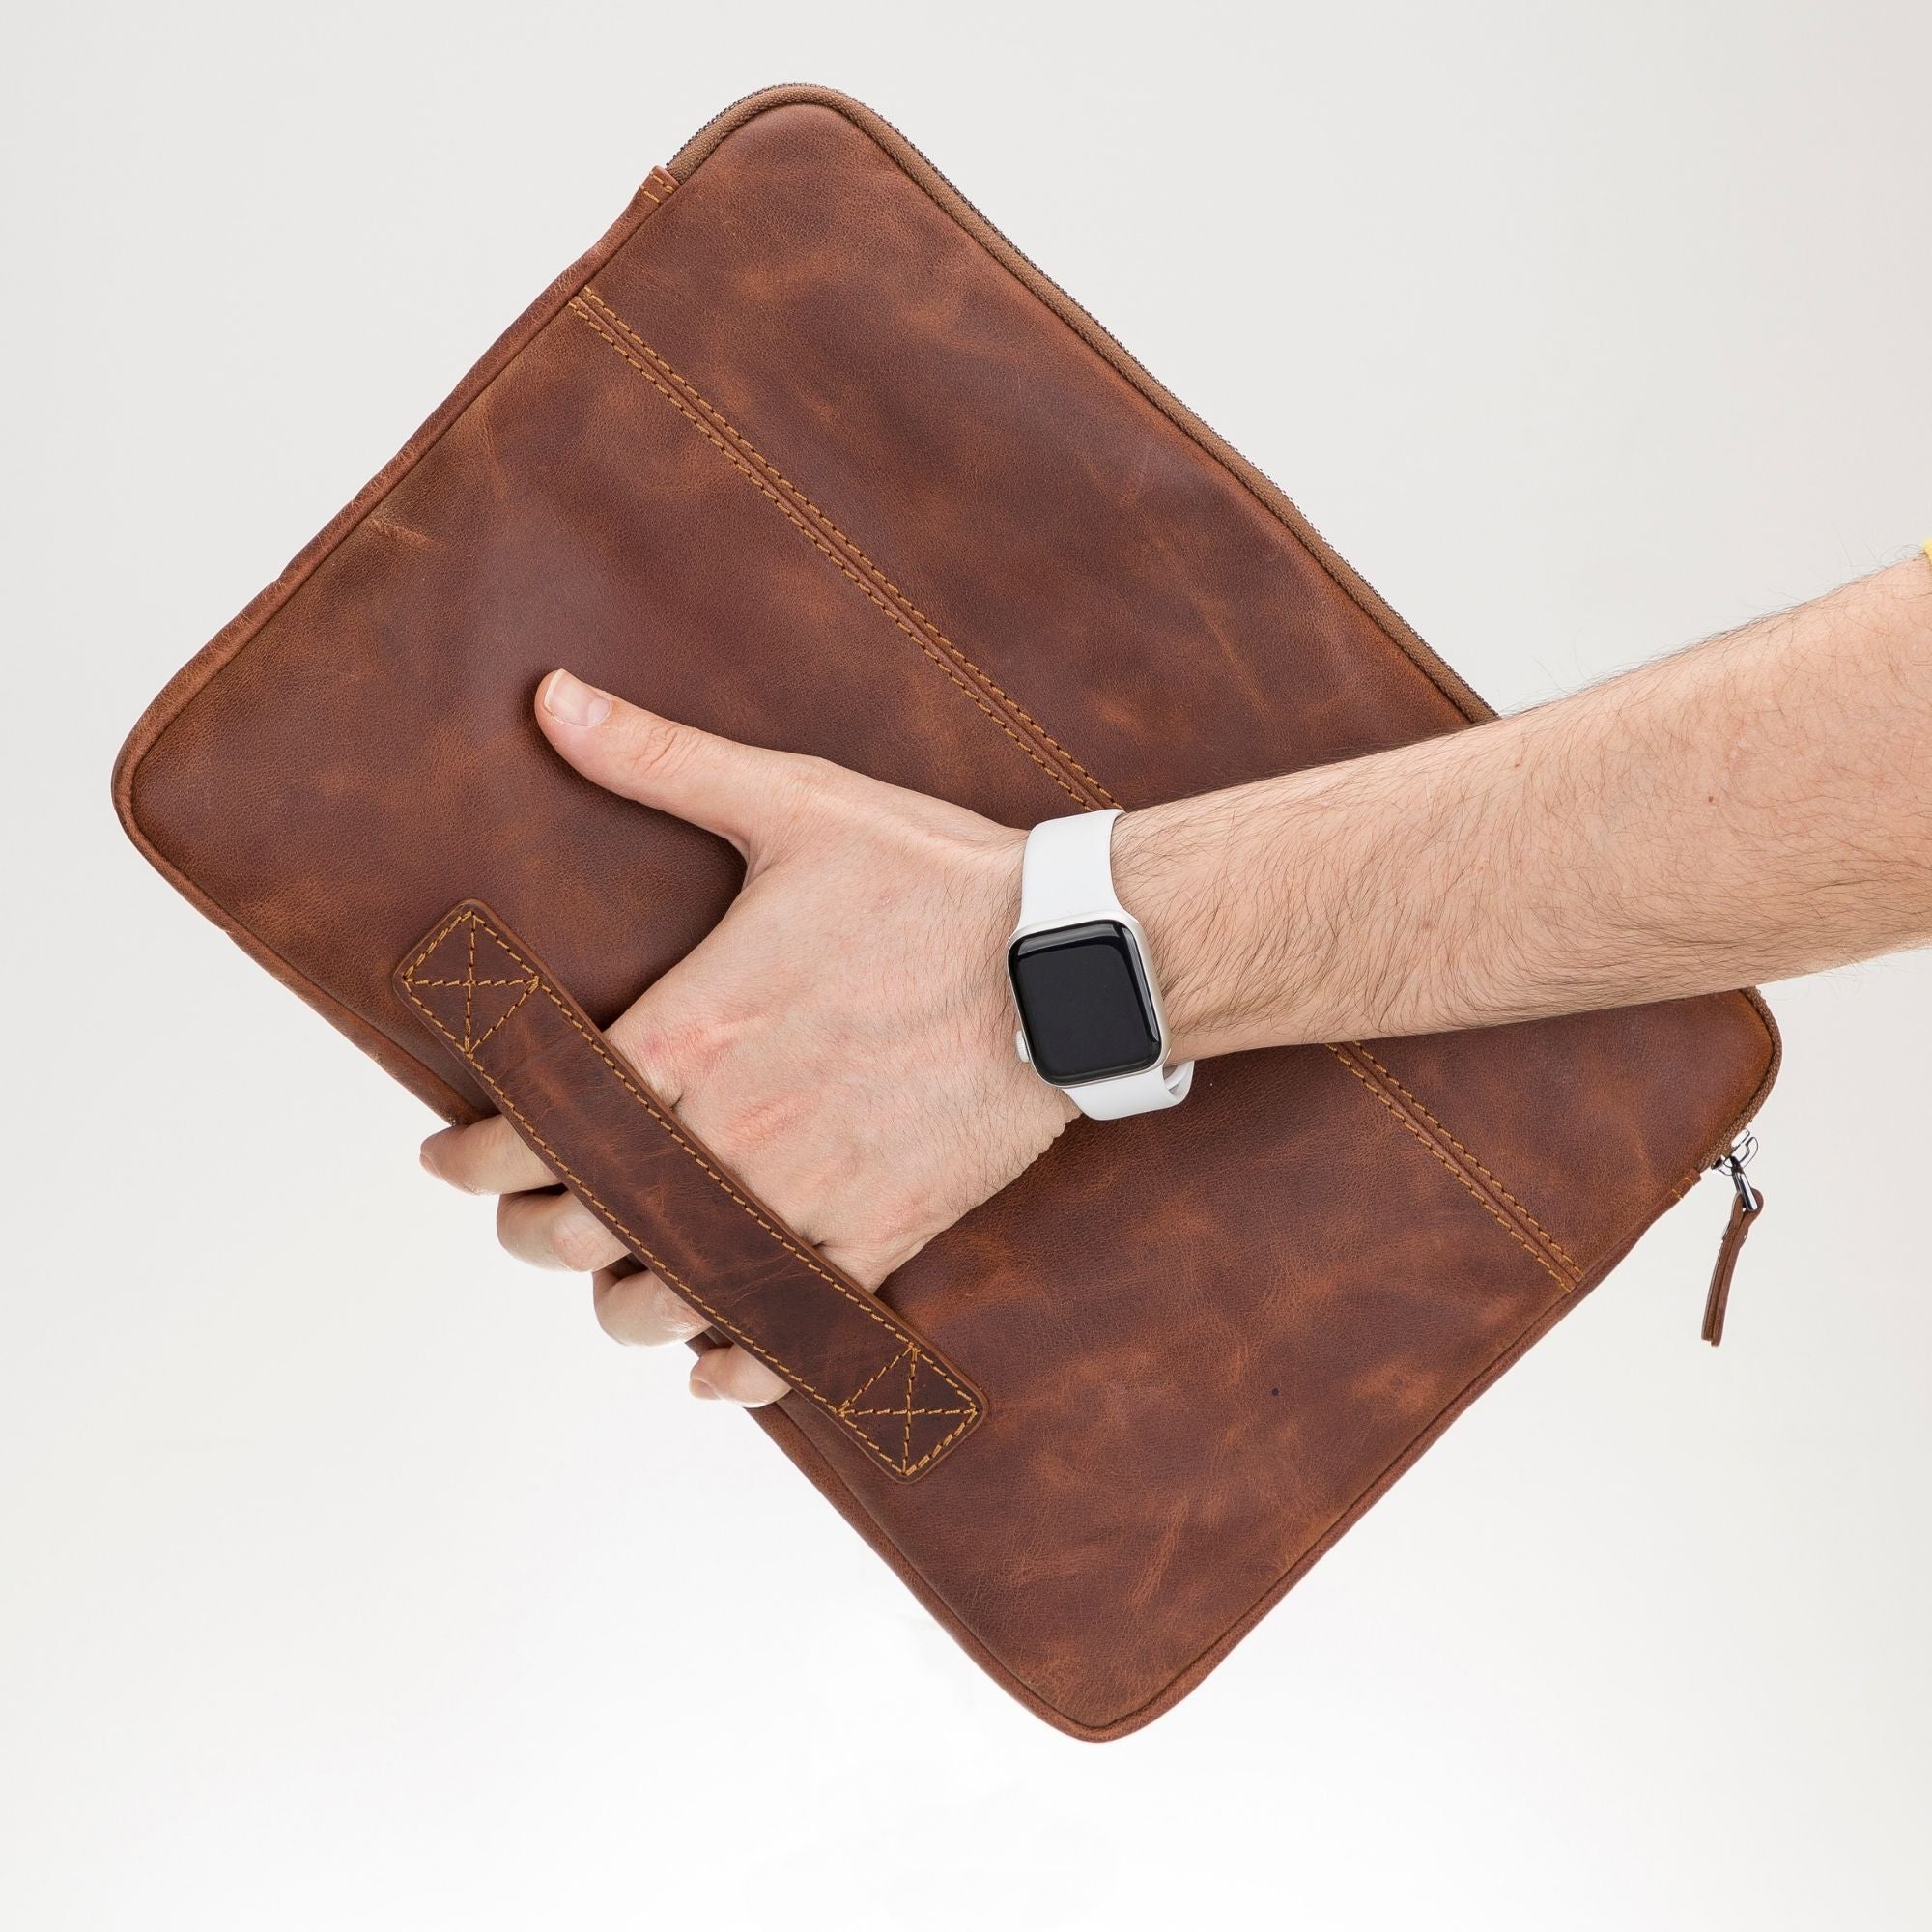 Kemmerer Leather Sleeve for iPad and MacBook - 11 Inches - Tiguan Brown - TORONATA